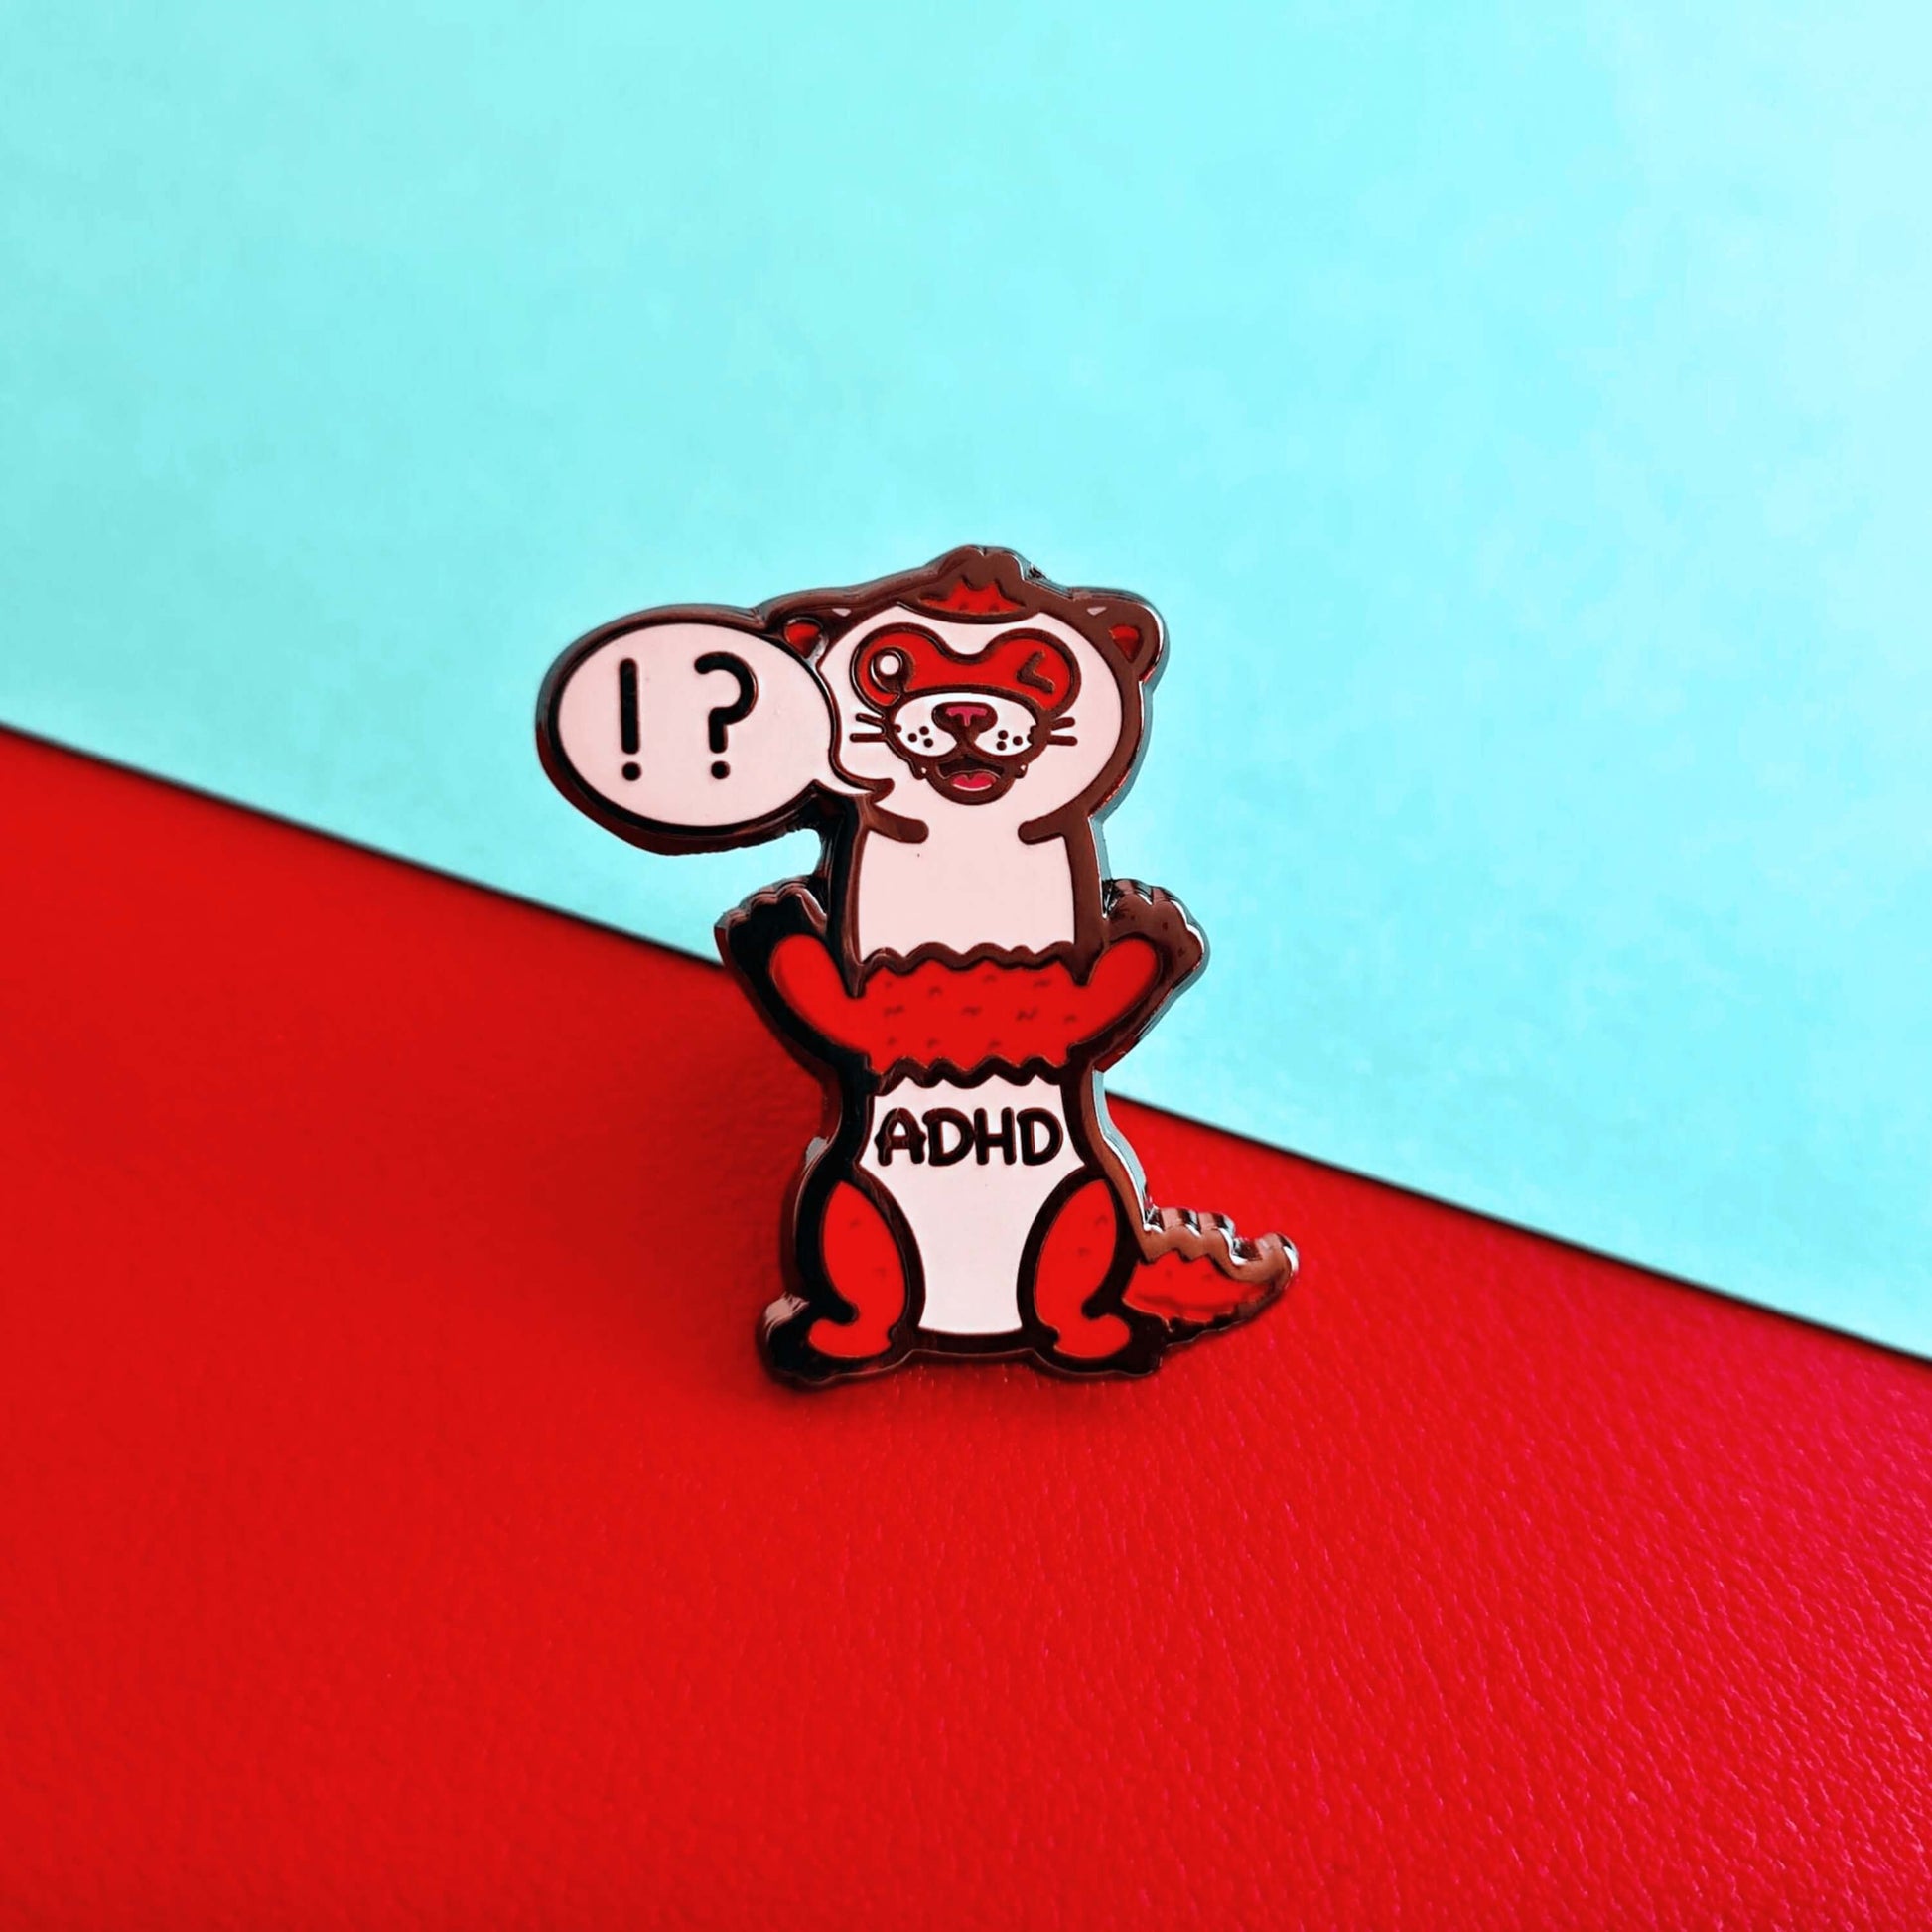 A red and white ferret enamel pin with it's mouth open in a smile and it's little teeth are showing. One of it's eyes are closed shut and it is standing on it's back legs. There is a speech-bubble from the ferret's mouth with '!?' inside it. The enamel pin is shown on a red and blue background. Raising awareness for ADHD - Attention deficit hyperactivity disorder.